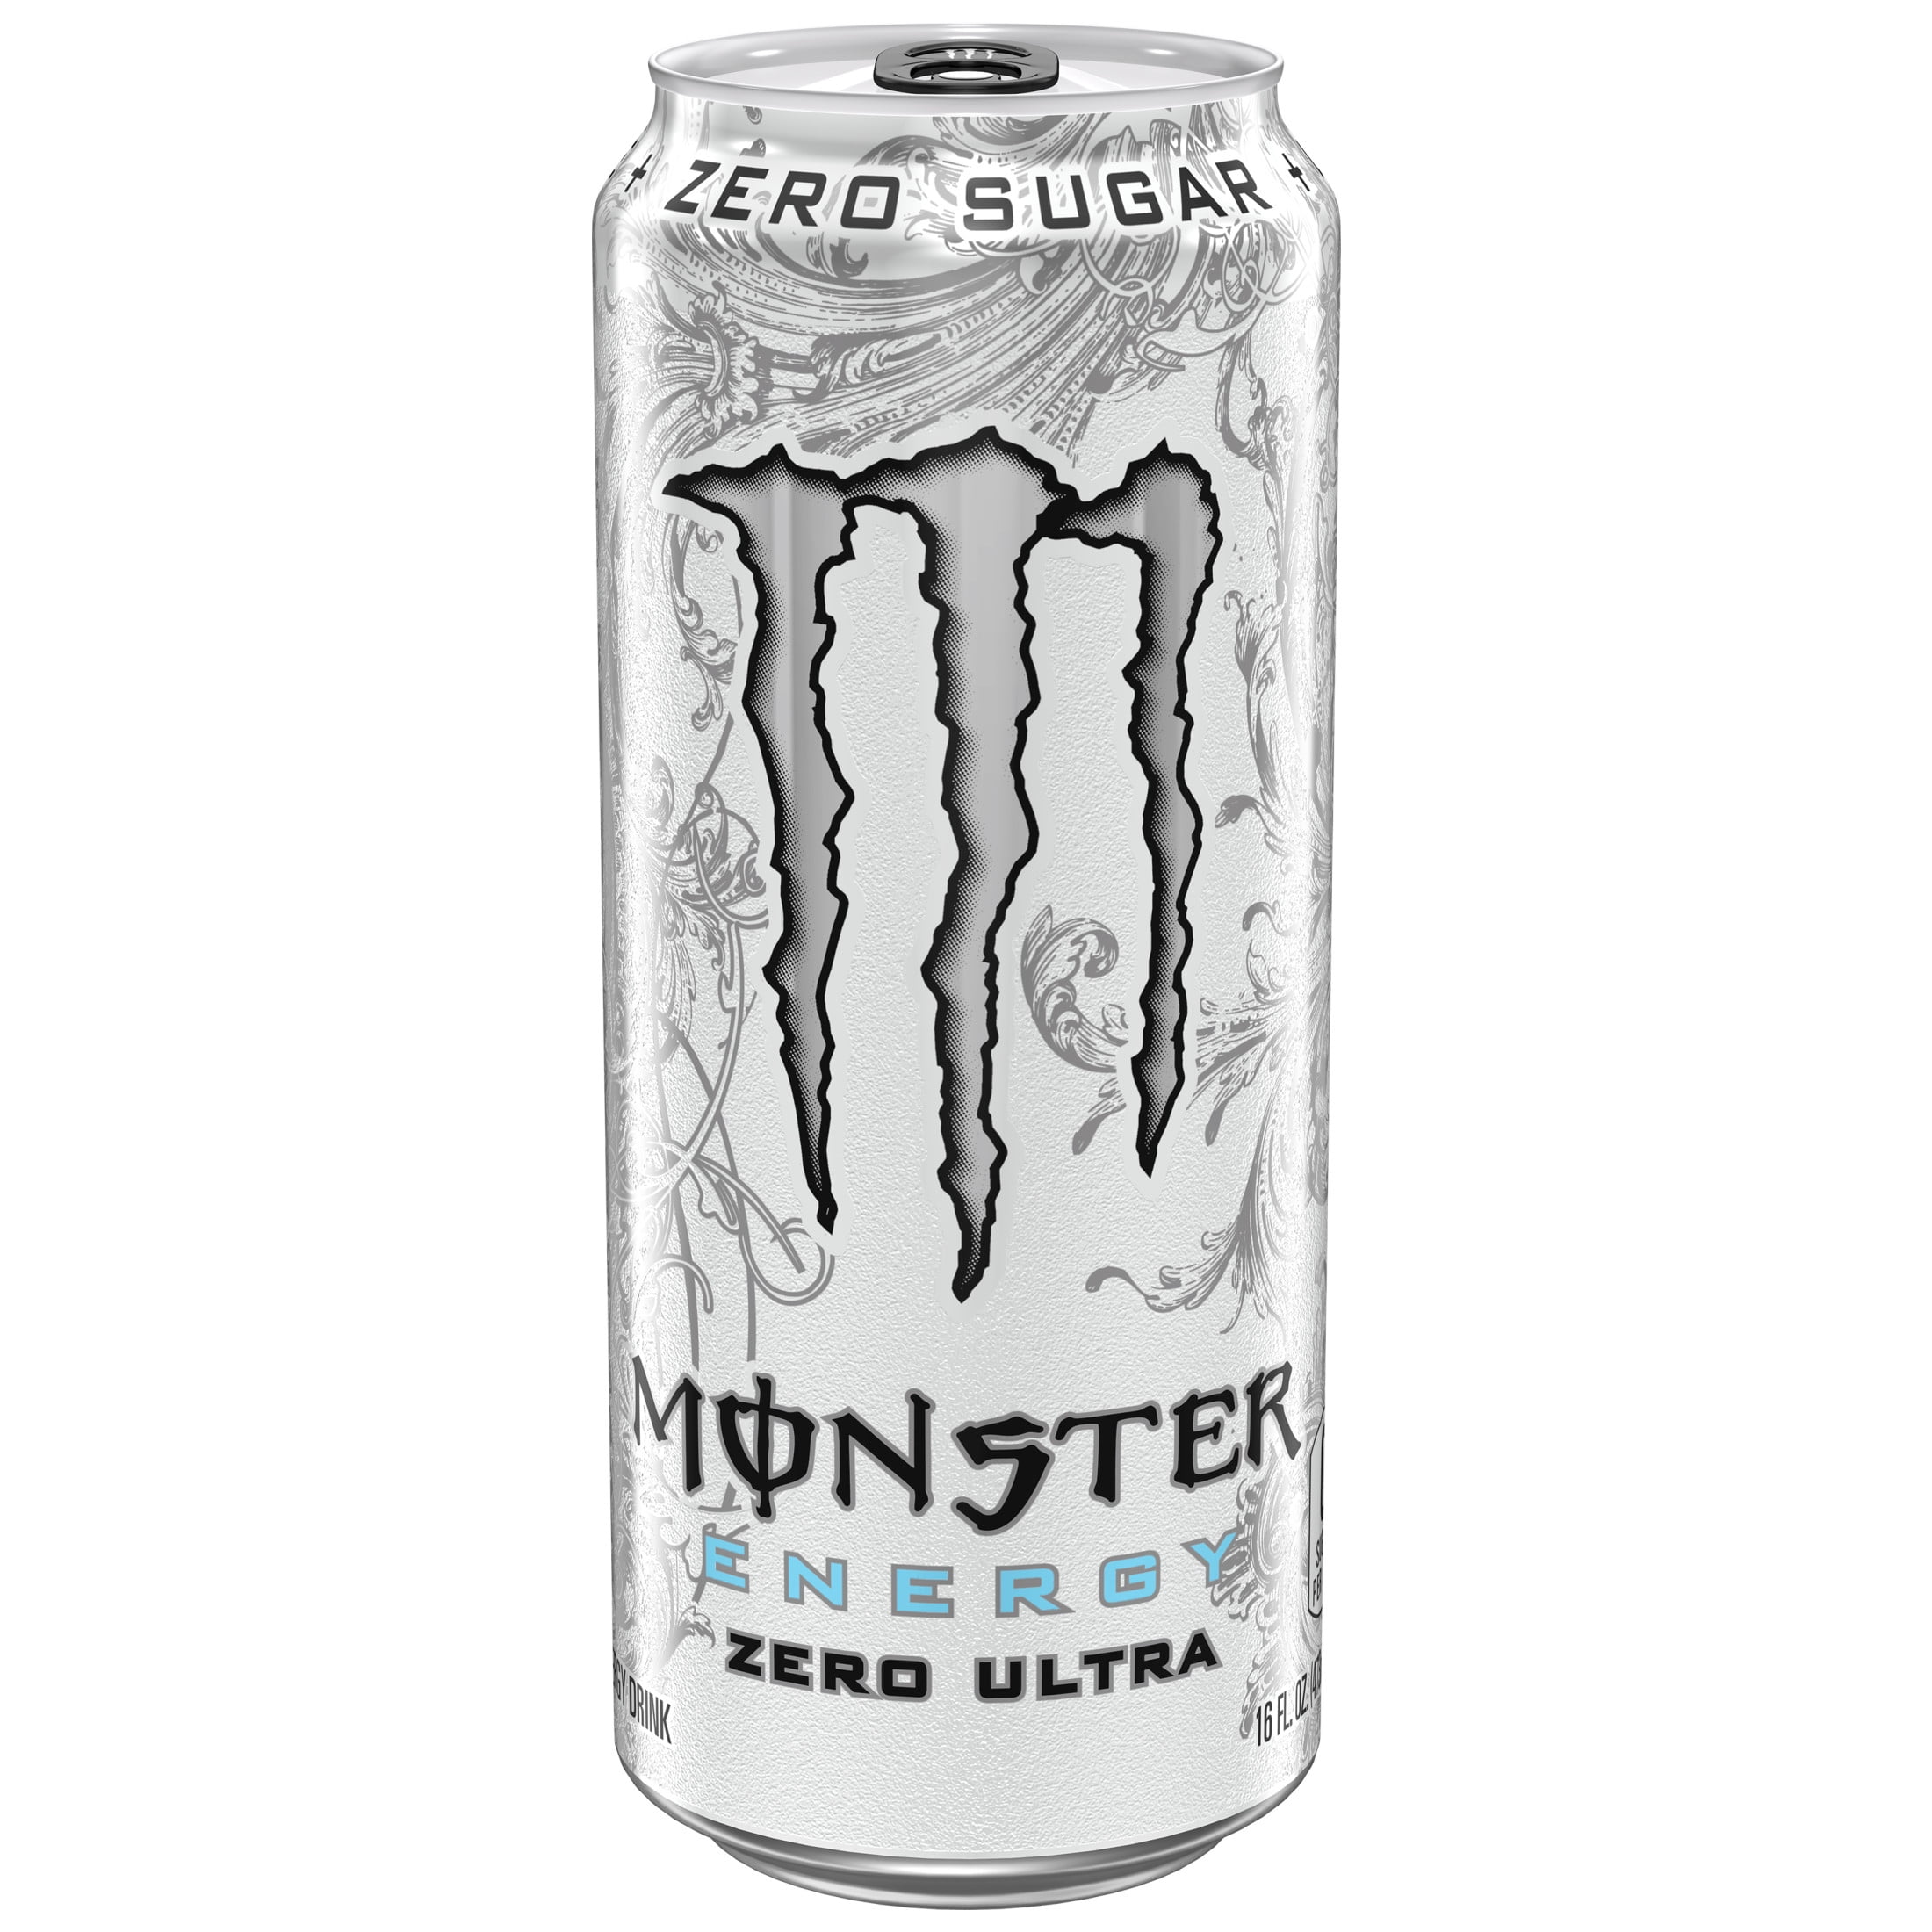 Monster Energy Drink Variety Pack - 16 Count 